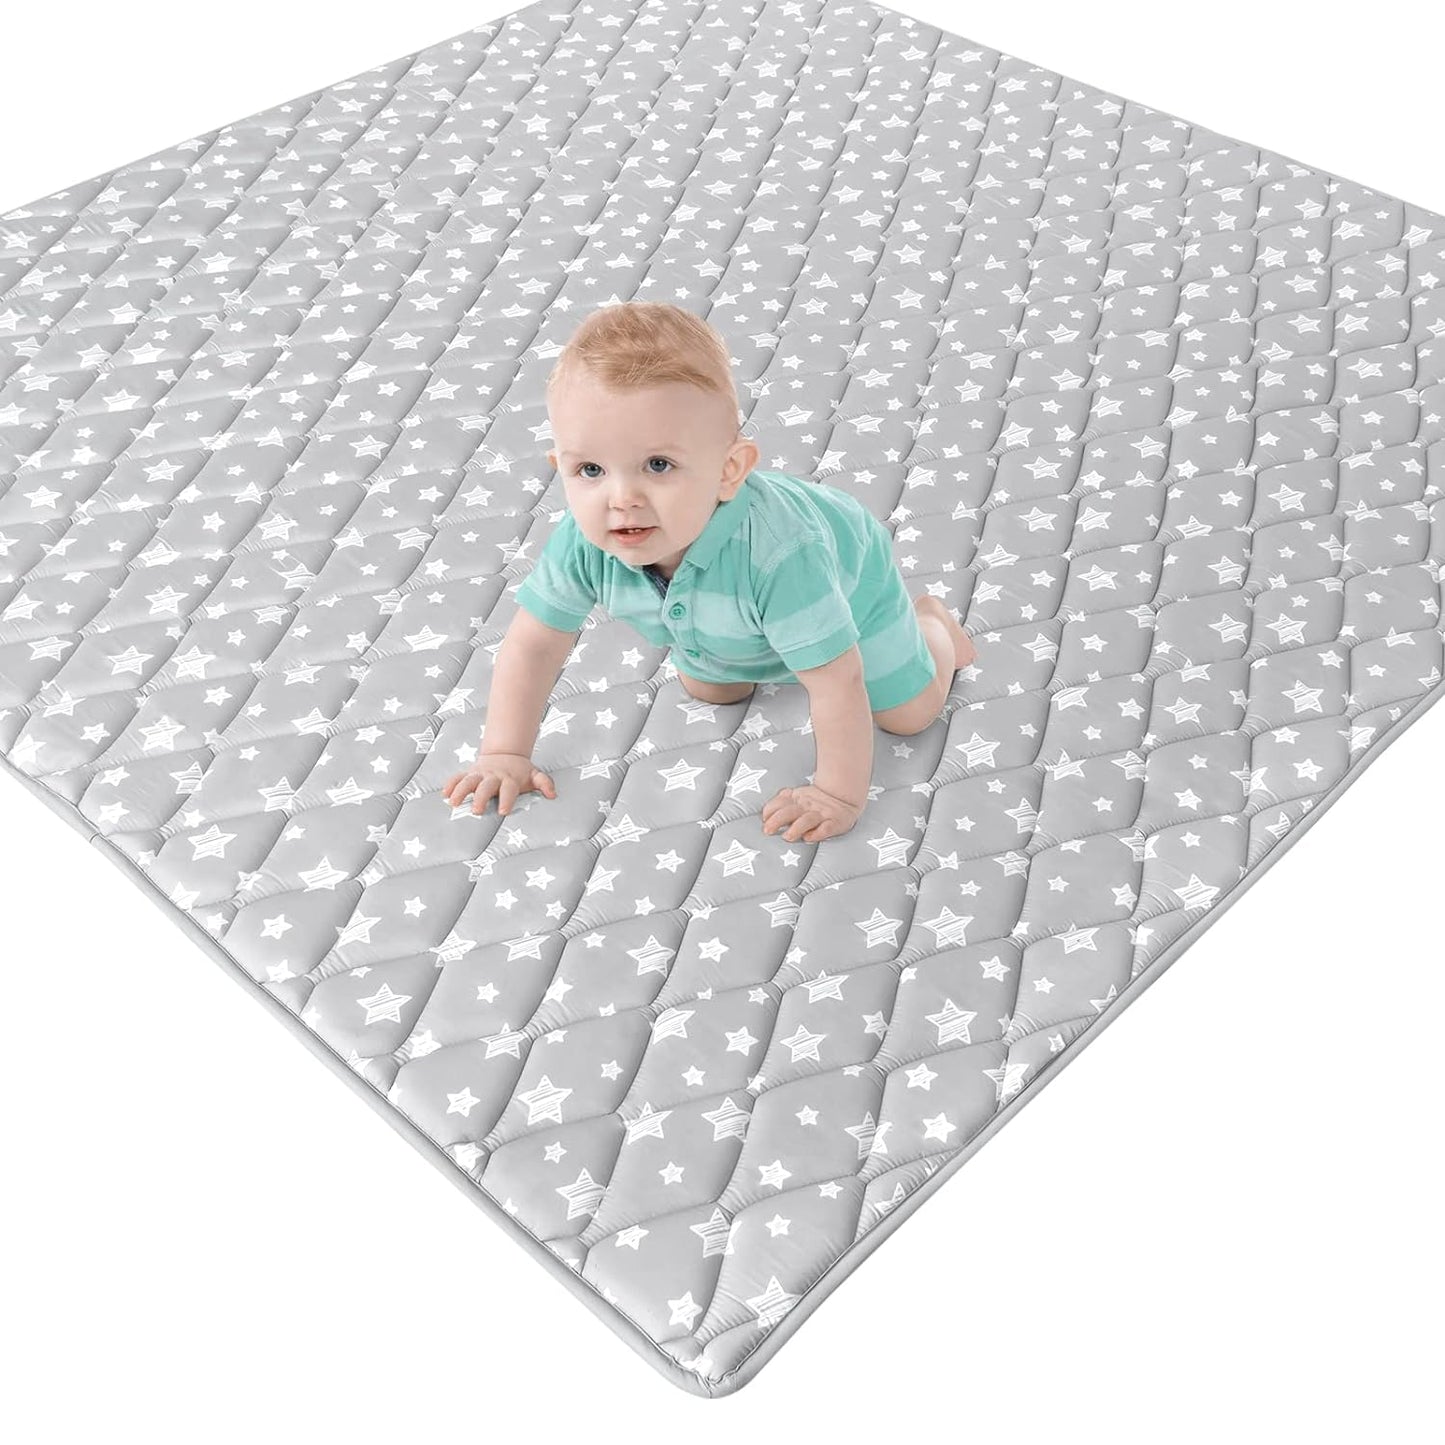 Premium Foam Baby Play Mat | Playpen Mat - 72" x 59", Thicker and Non-Toxic Crawling Mat for Infant & Toddler, Grey Star - Moonsea Bedding